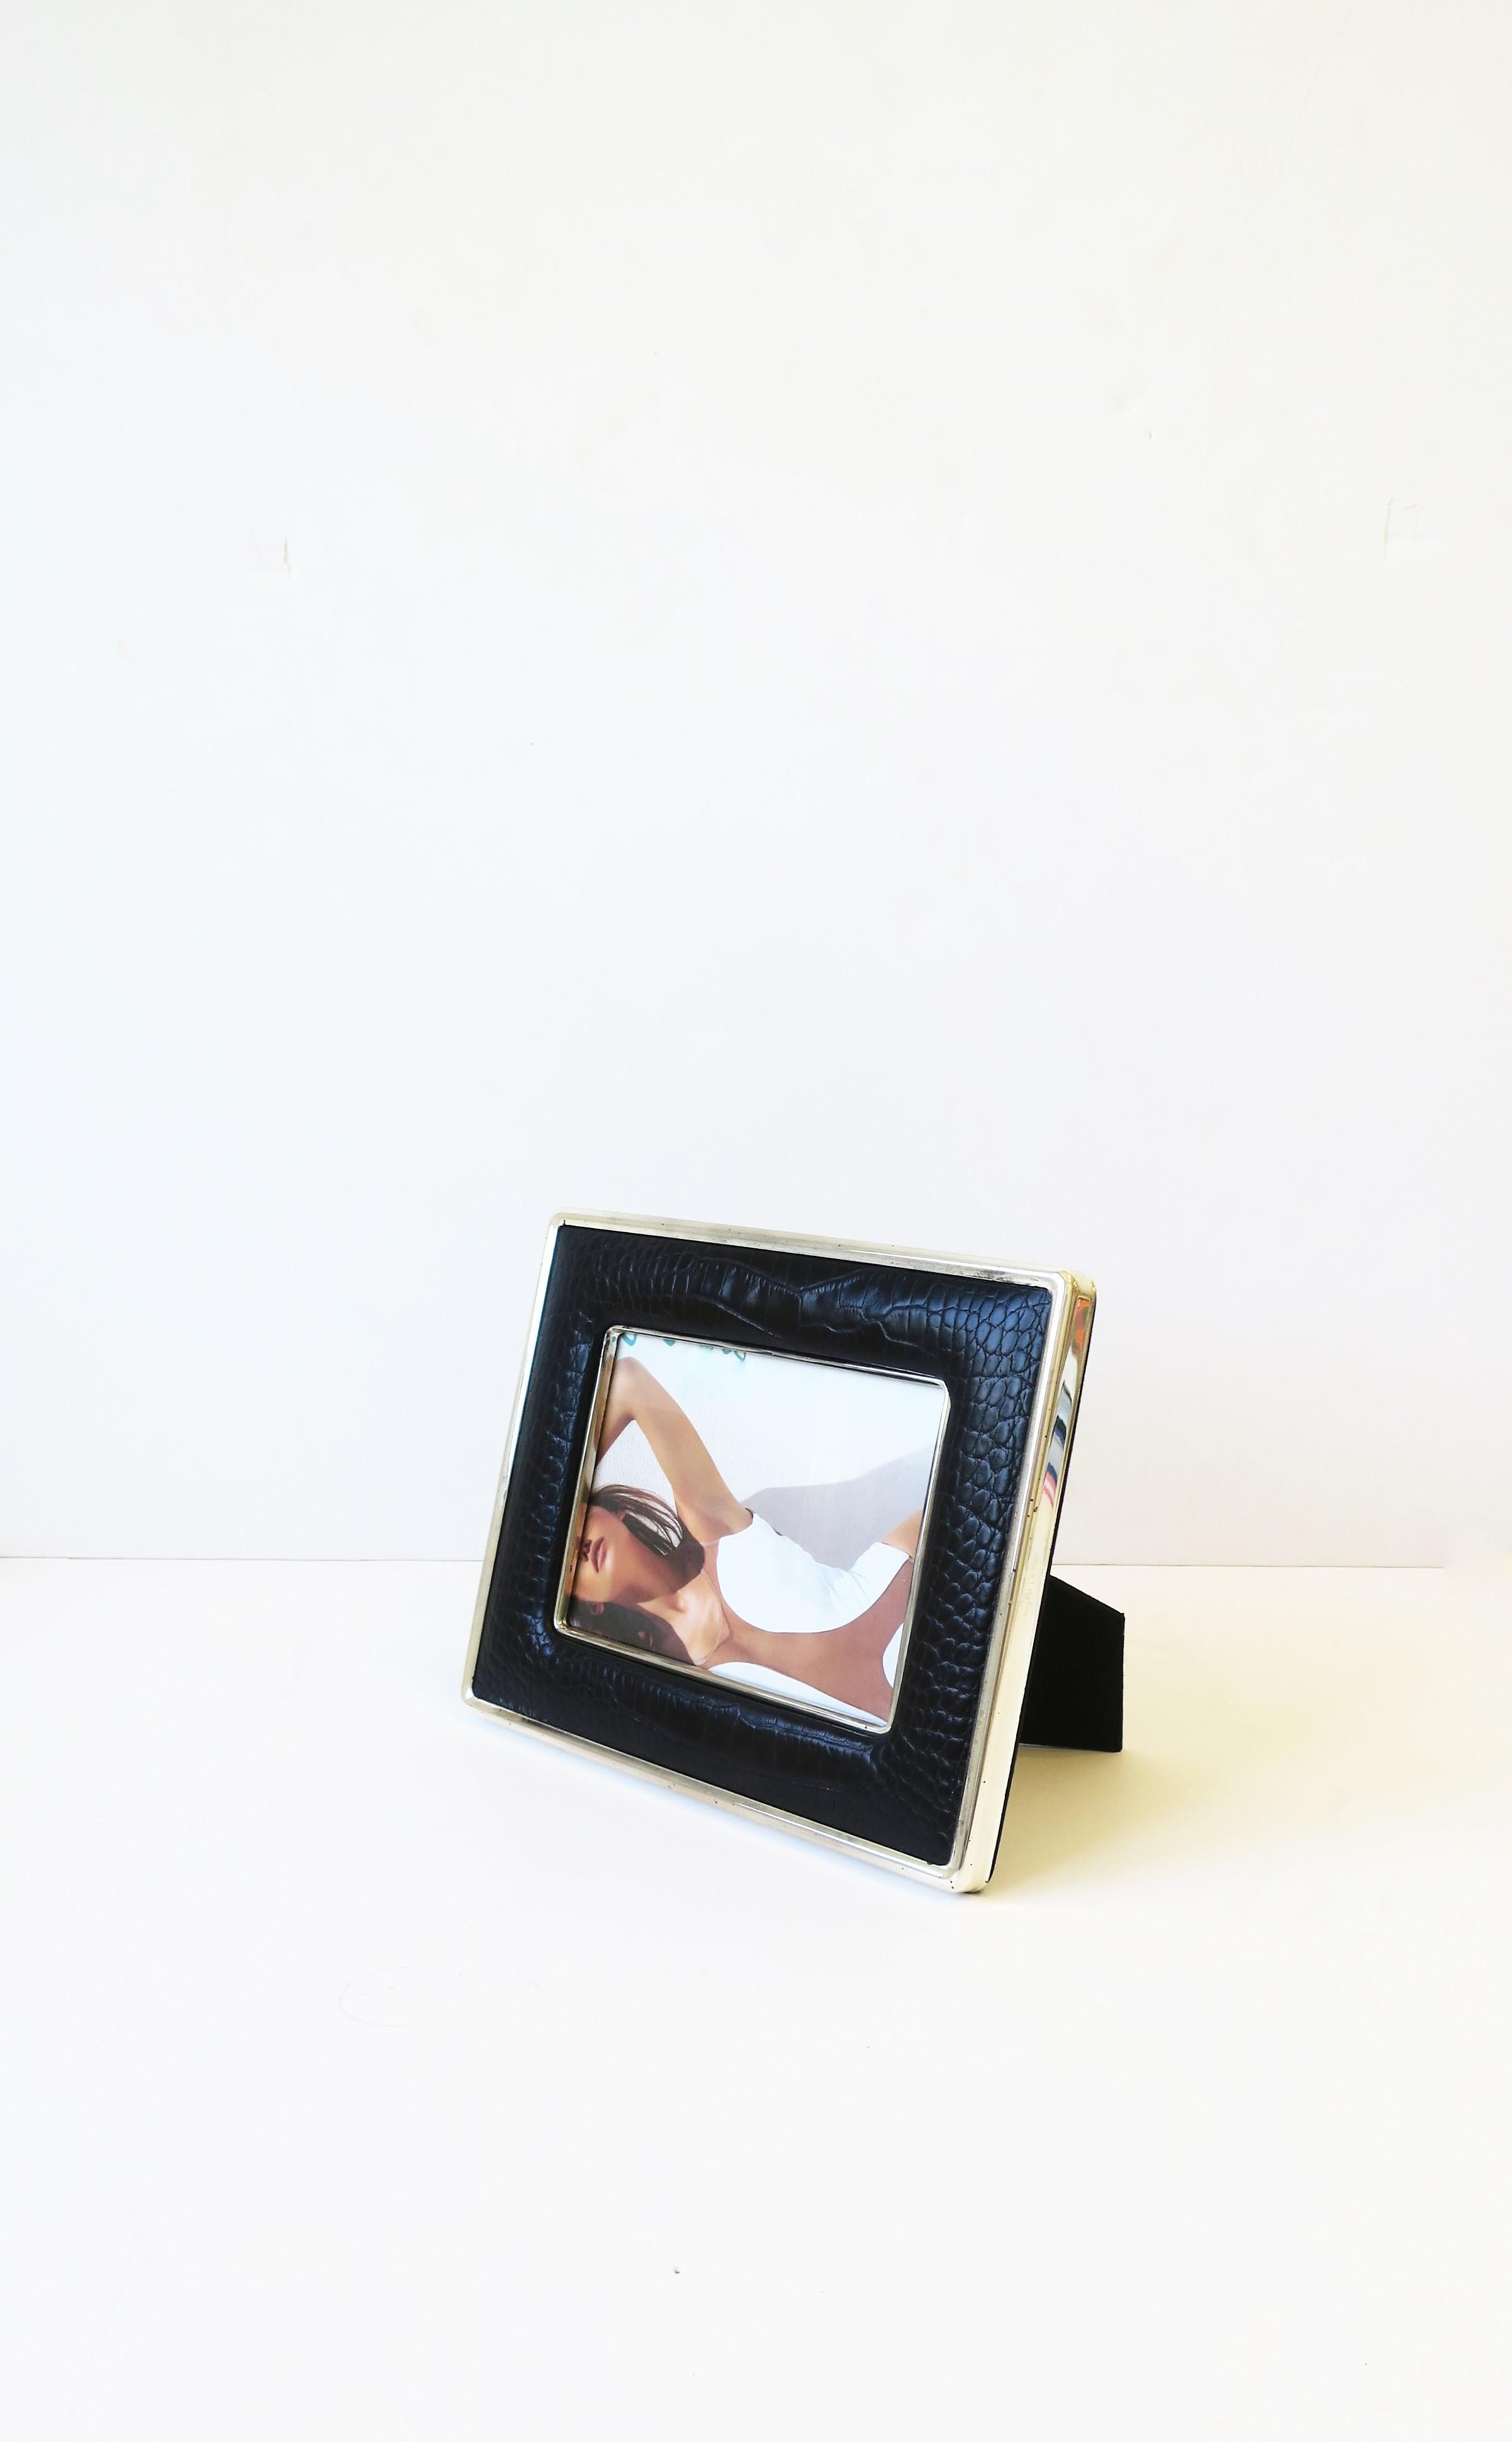 A Ralph Lauren black leather and sterling silver plate picture frame, circa late 20th century. Made in England. A beautiful frame that can be positioned both vertical or horizontal as demonstrated in images. Leather is embossed like crocodile or